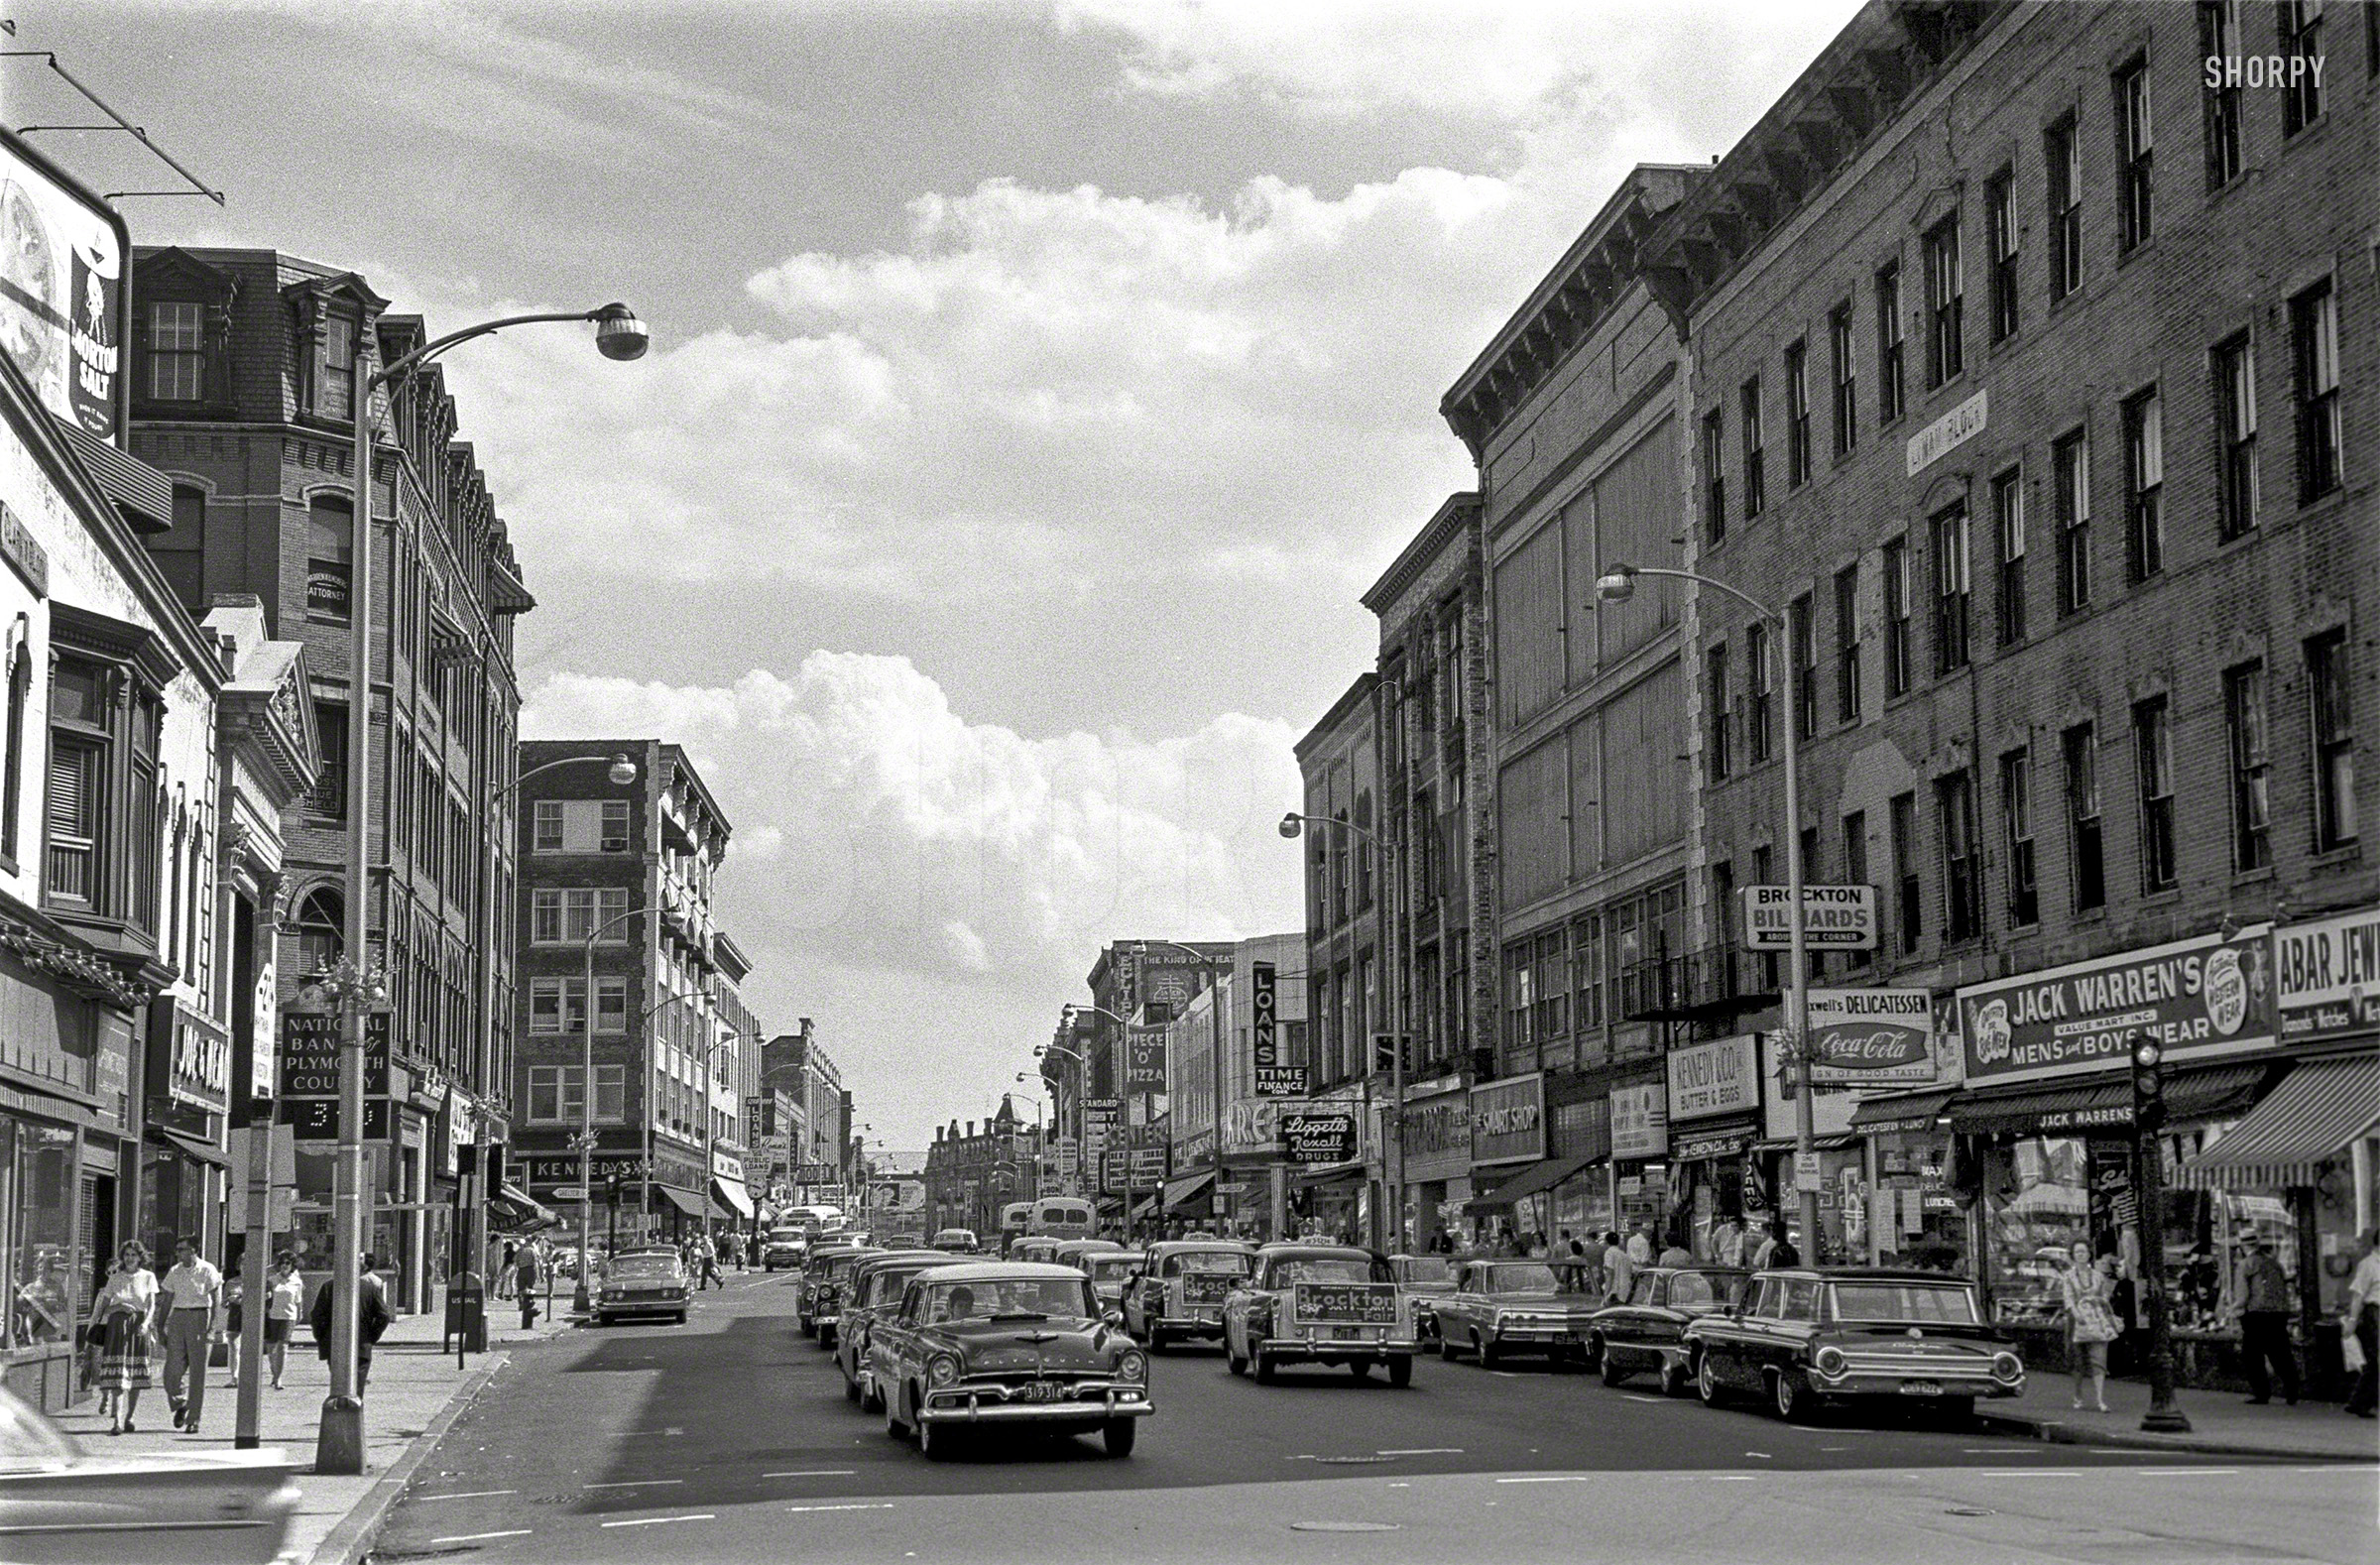 "Street scene, Brockton, Massachusetts, July 1962." You'll find Shorpy at the Piece 'O' Pizza. 35mm negative, photographer unknown. View full size.